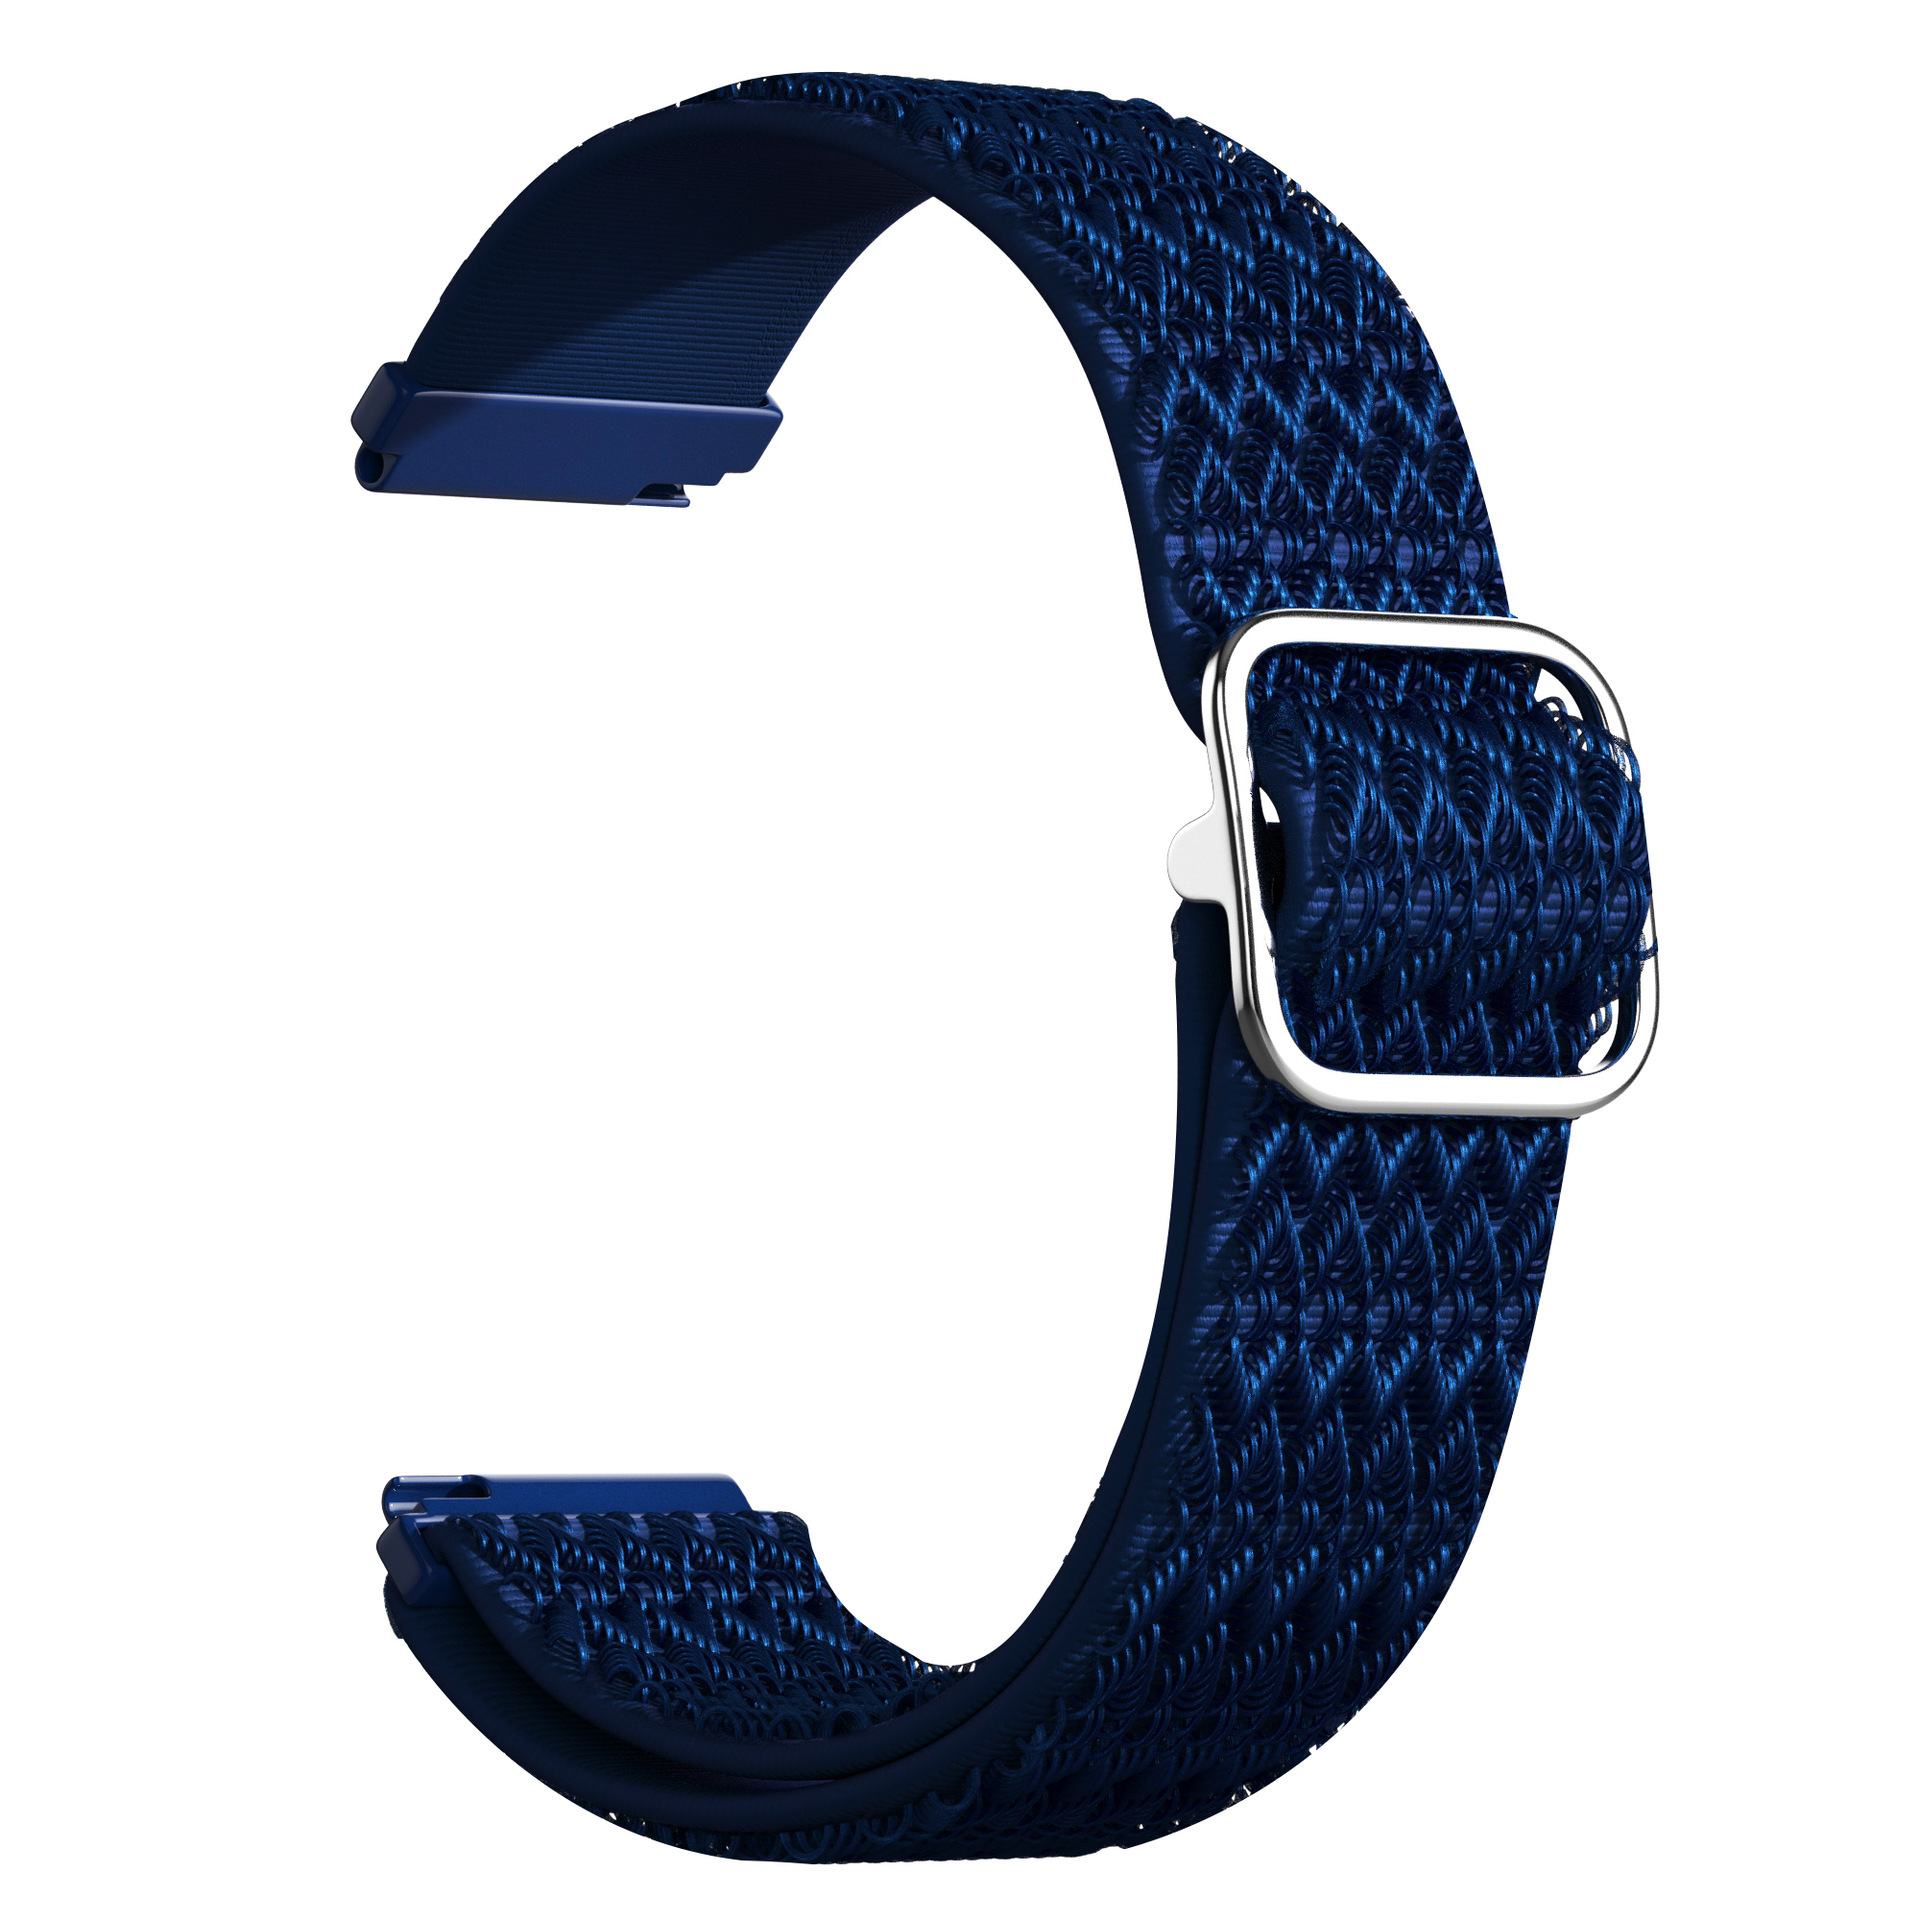 Bakeey-20mm-Nylon-Diamond-Pattern-Elastic-Cloth-Watch-Band-Strap-Replacement-for-Samsung-Galaxy-Watc-1885076-11